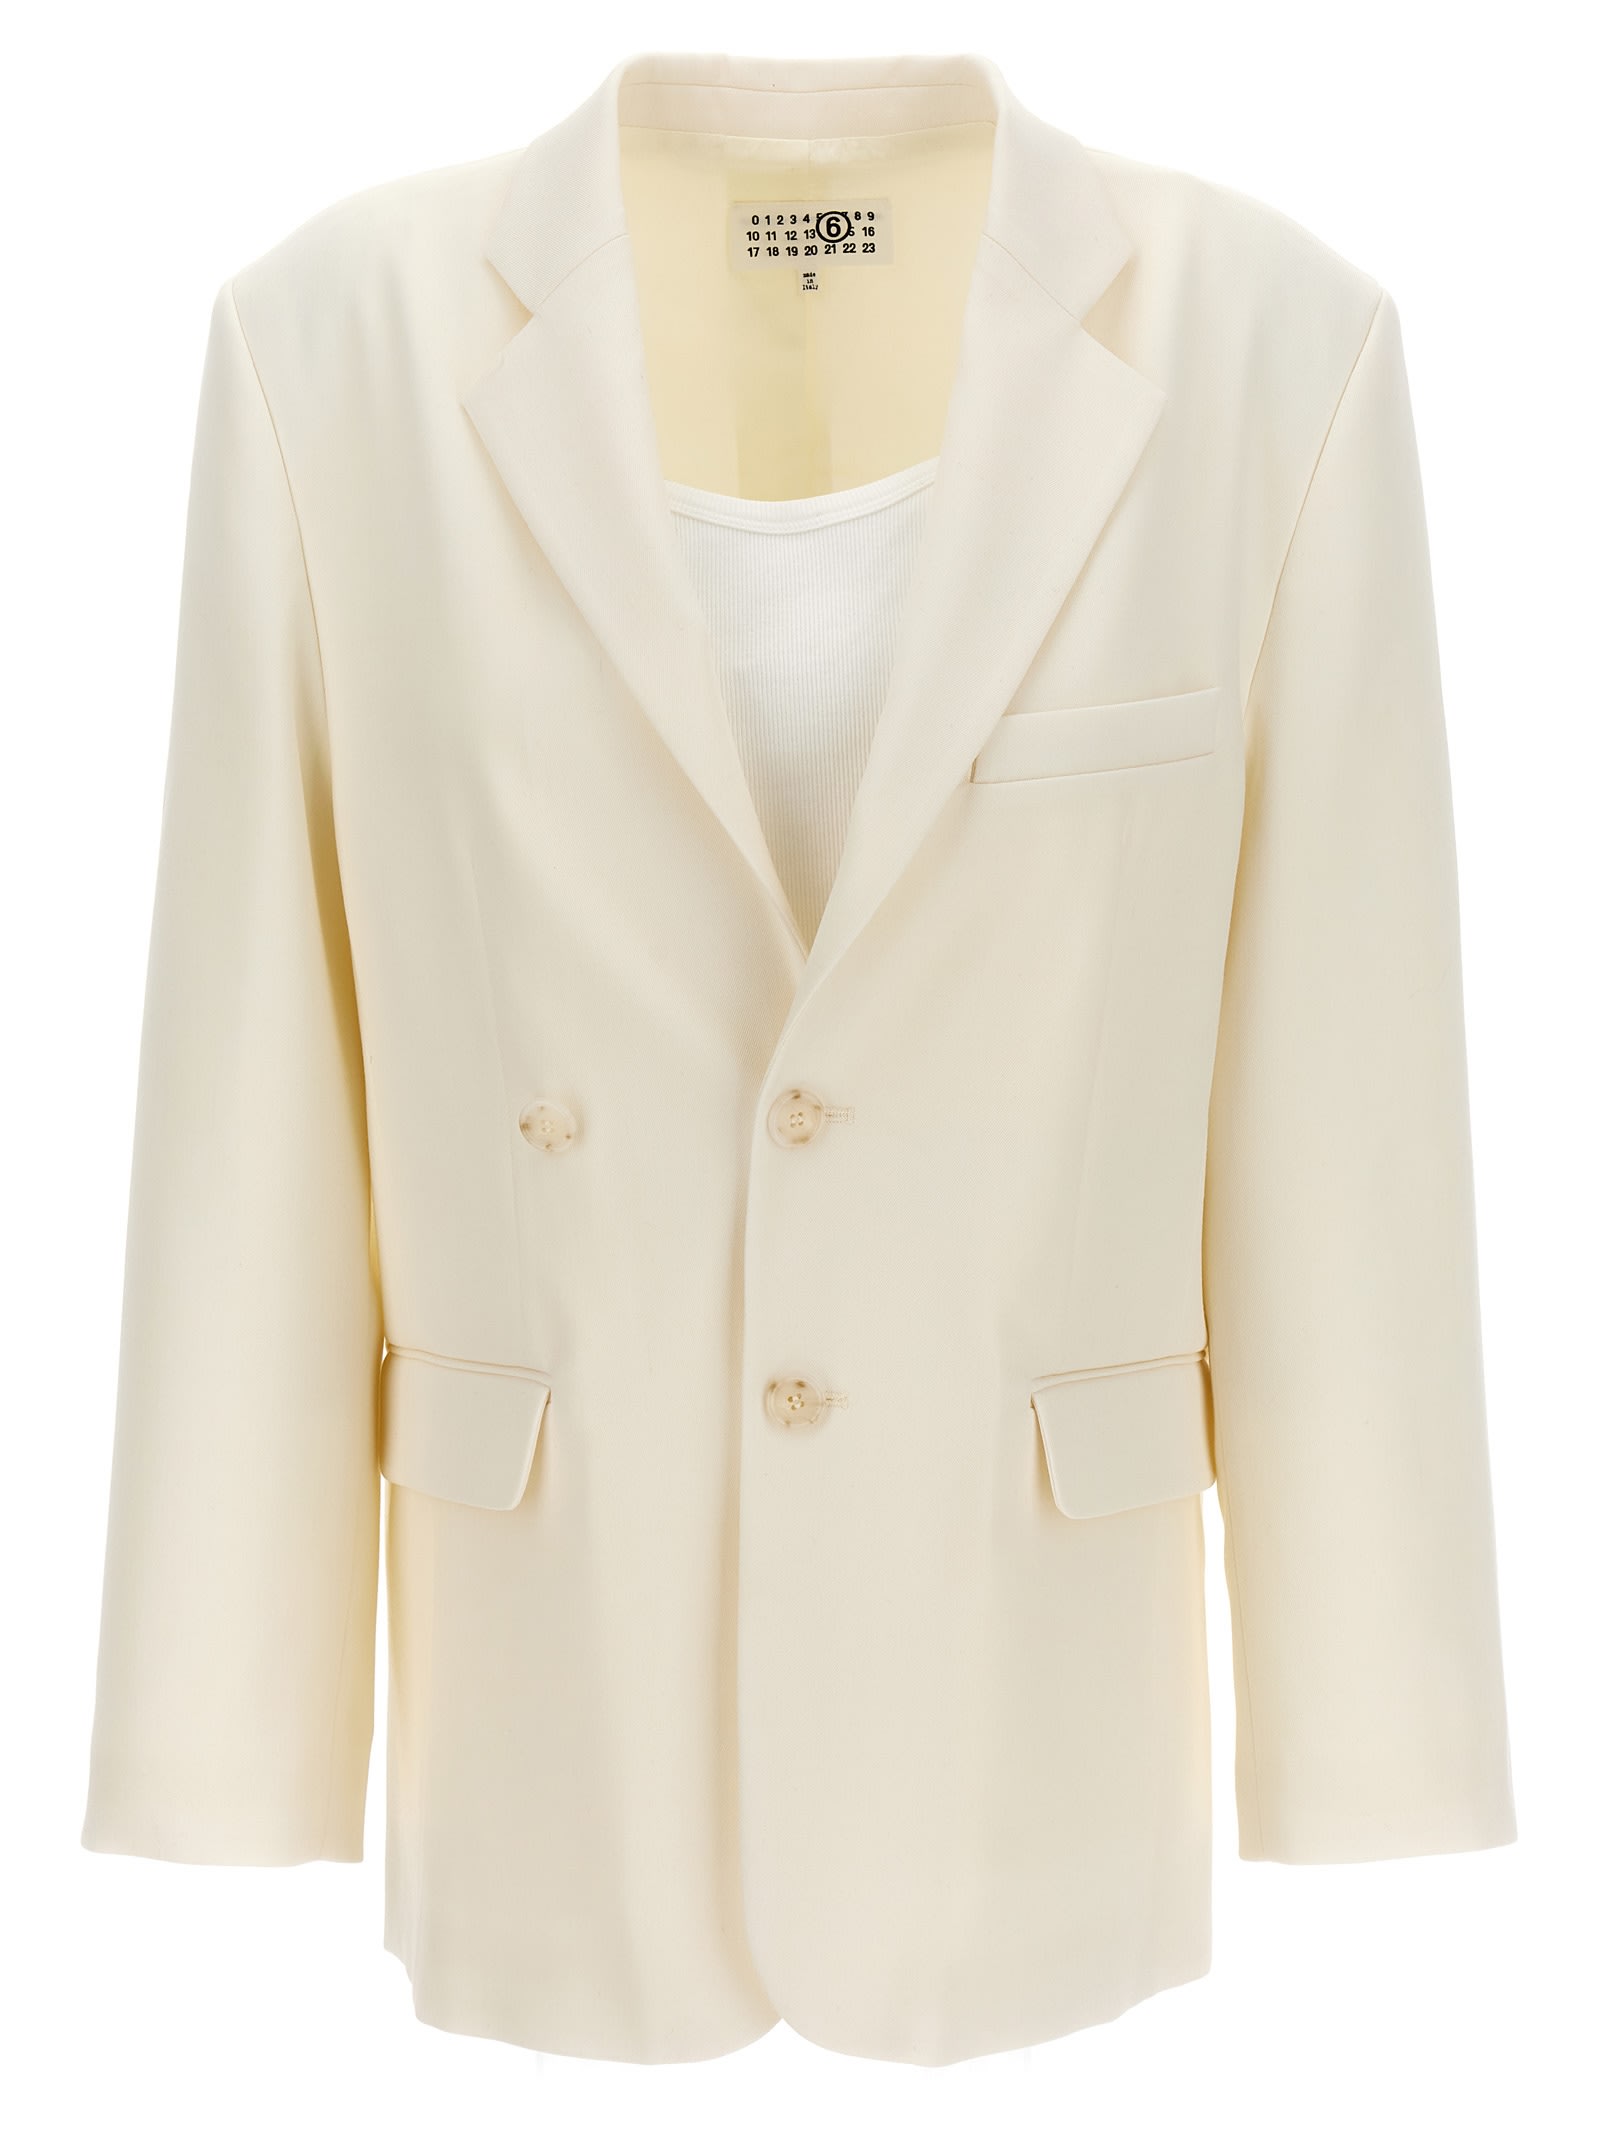 MM6 MAISON MARGIELA SINGLE-BREASTED BLAZER WITH TOP INSERT